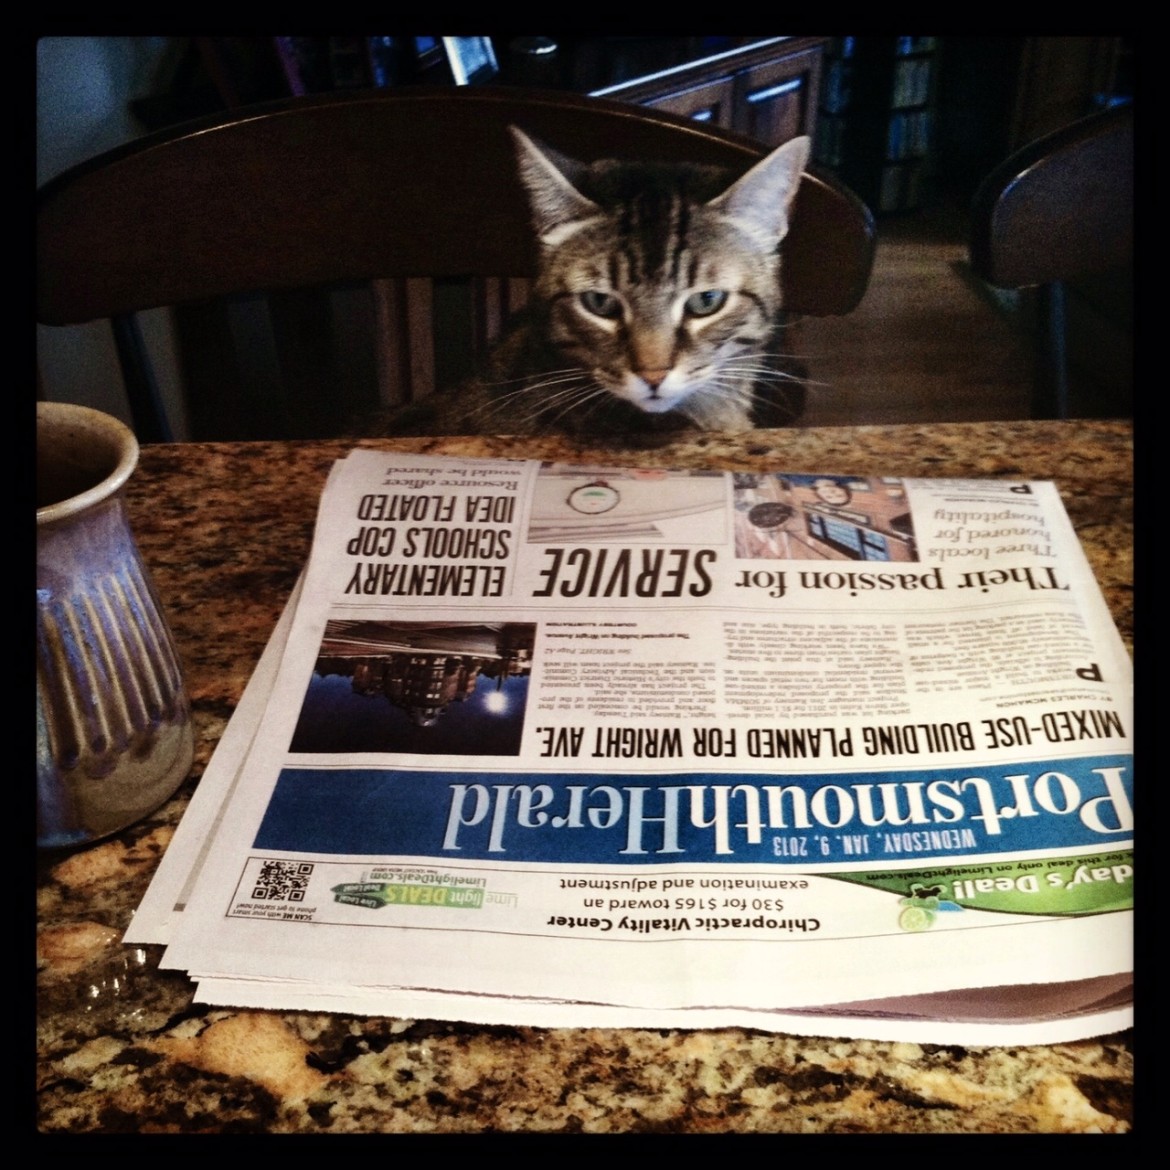 Sammy, the tabby, saw the Romney story in the paper, but the other cats were sleeping on the story.